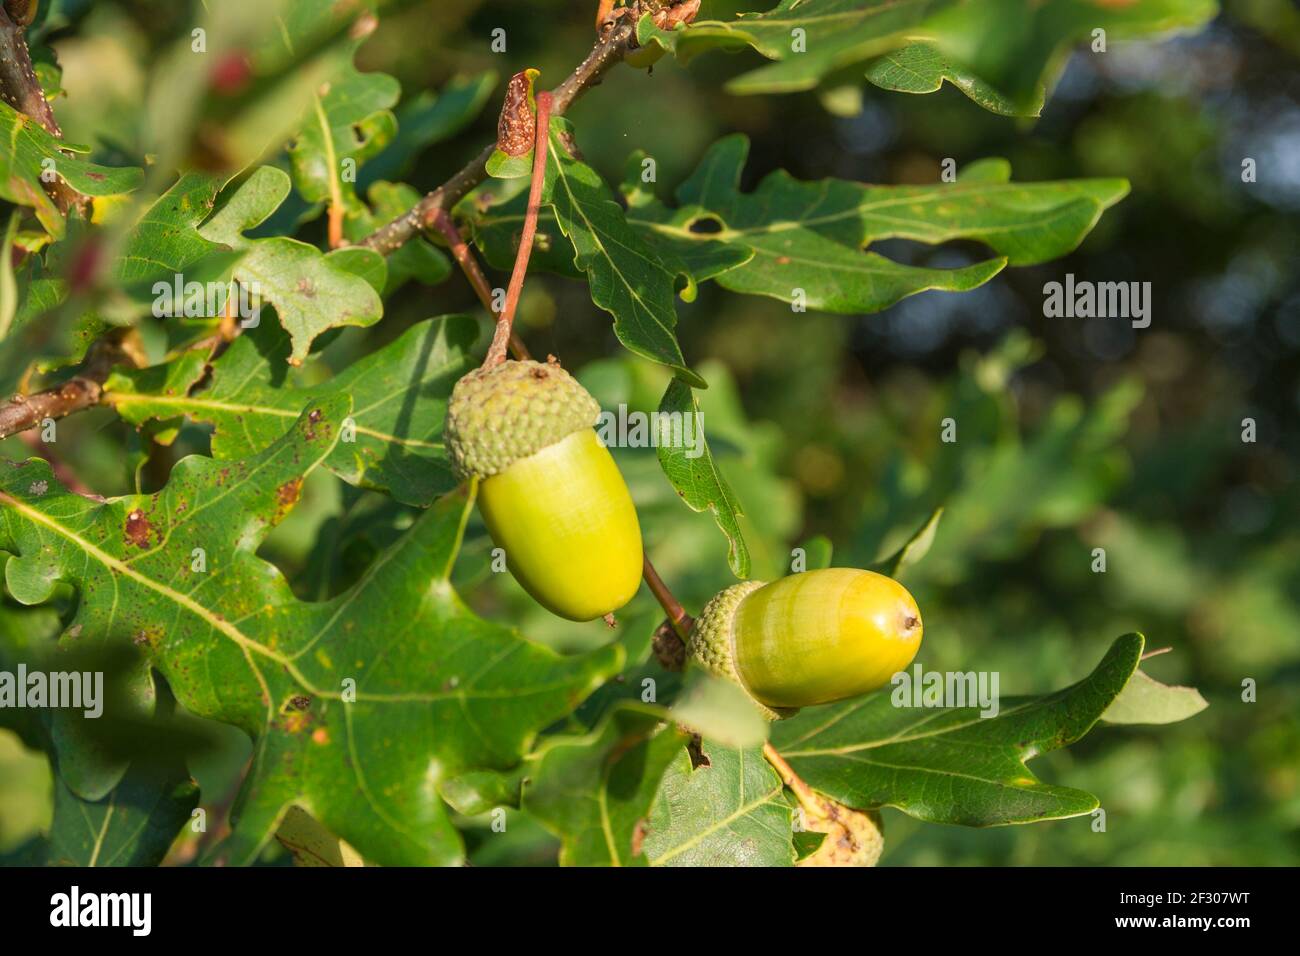 Two acorns on a branch Stock Photo